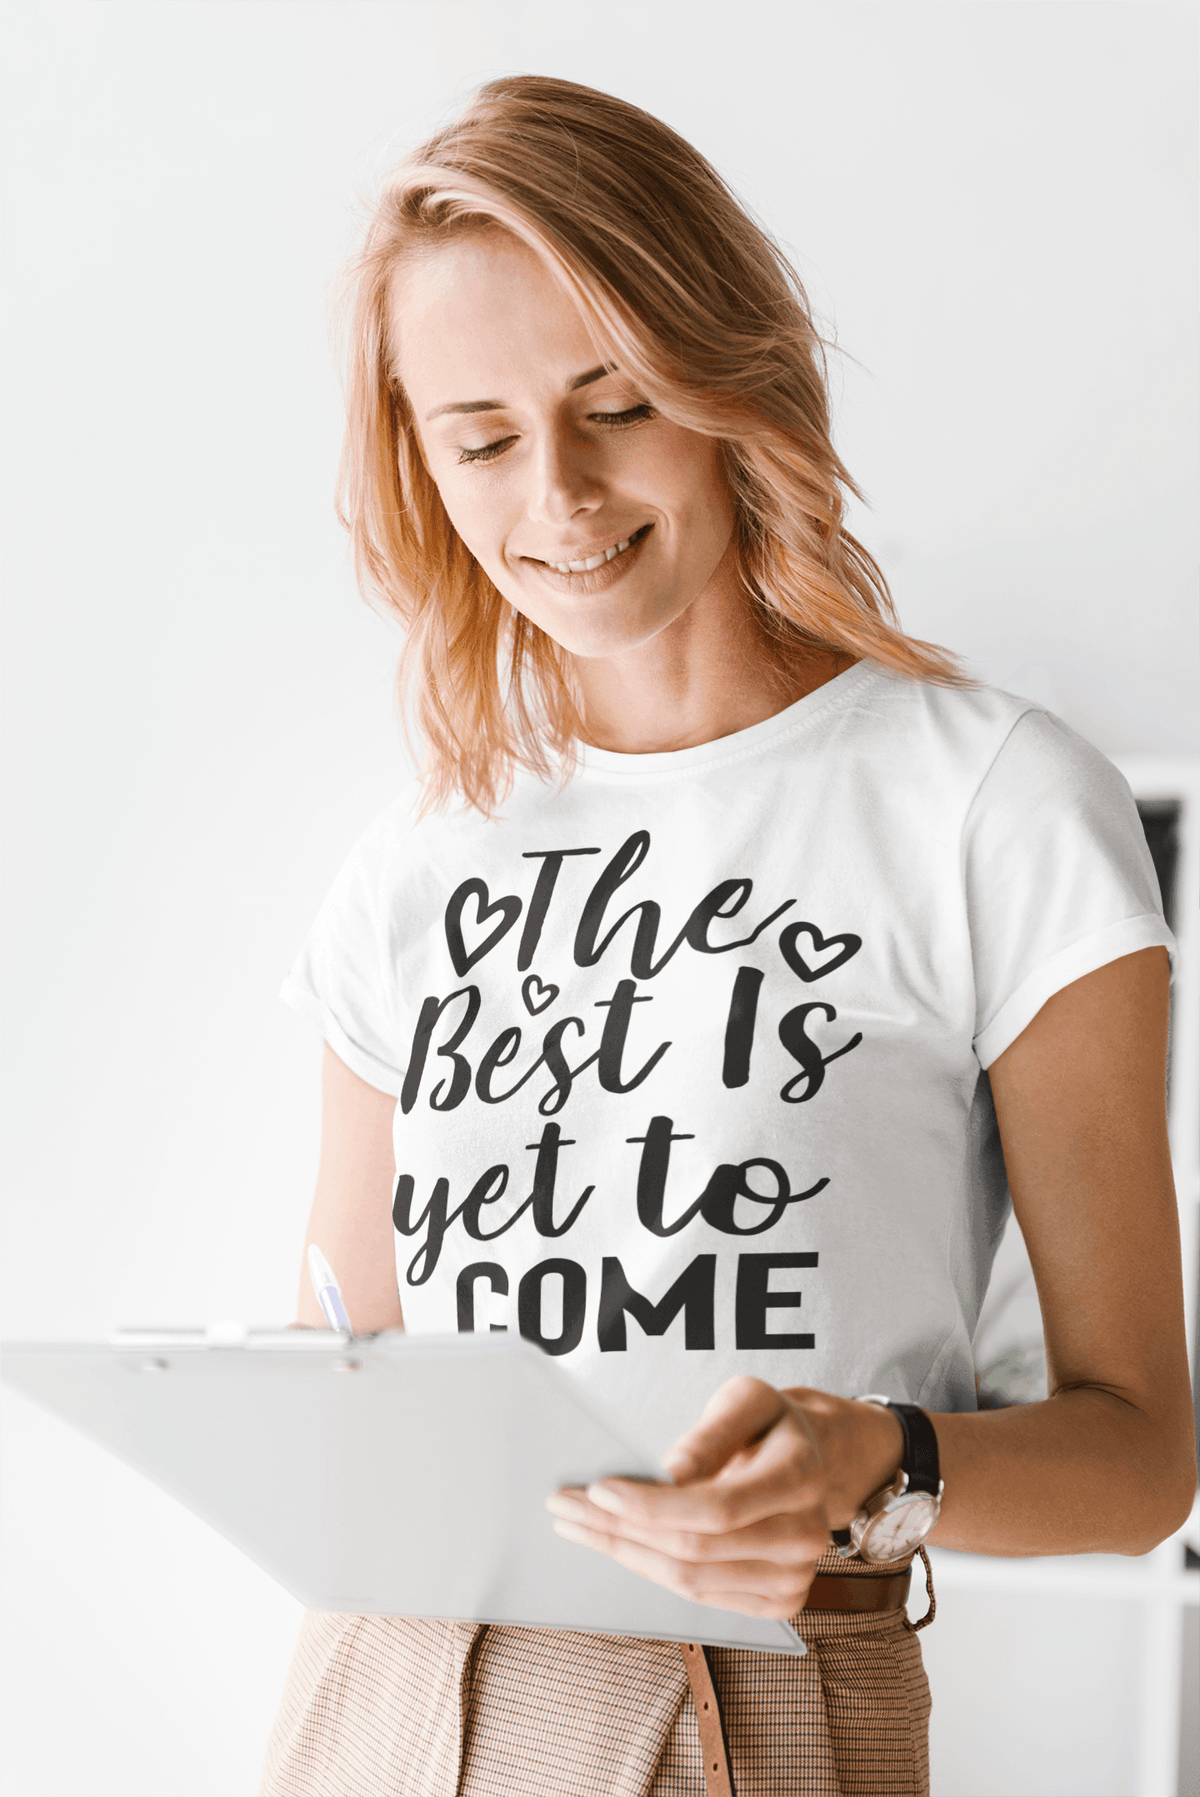 The Best is Yet to Come T-shirt - StylinArt